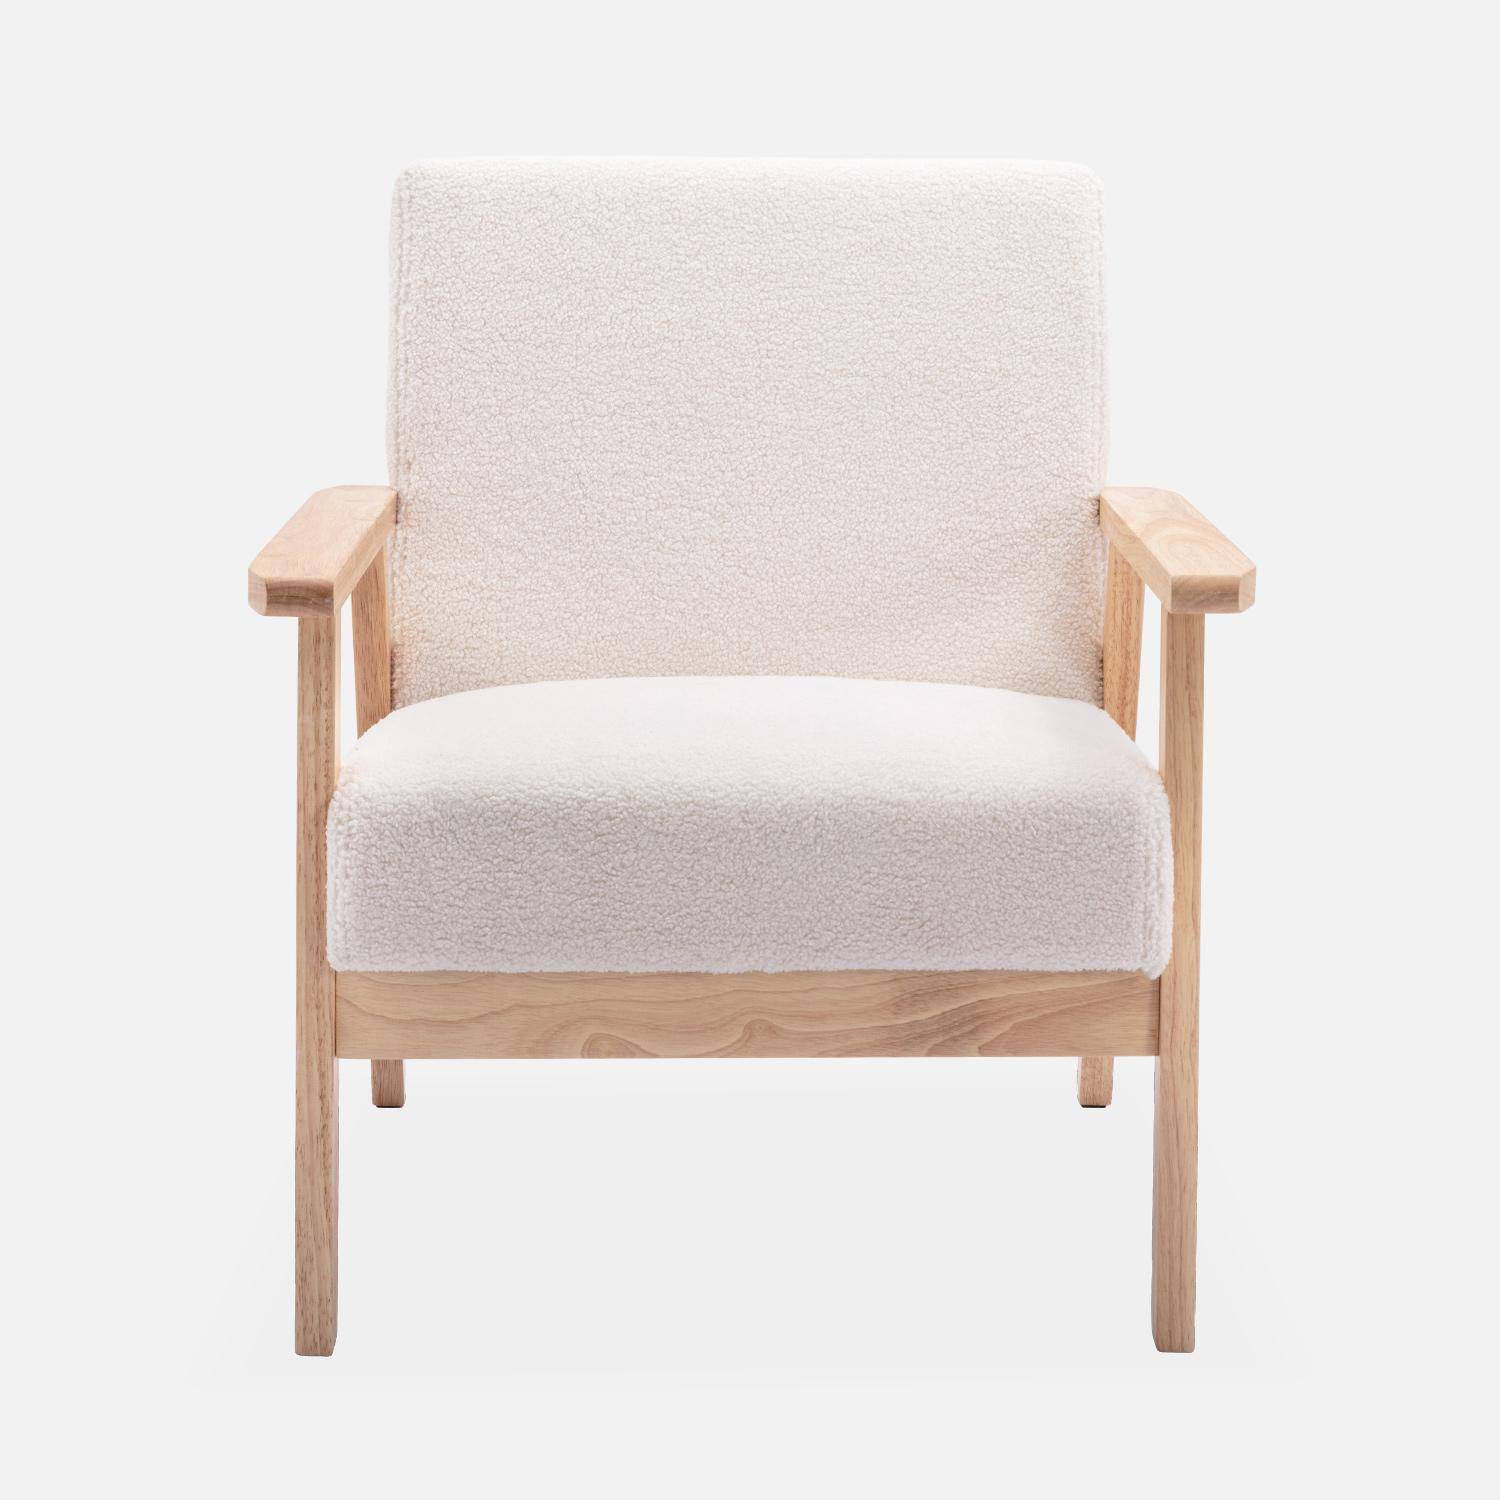 Scandi-style boucle armchair, wooden frame and boucle fabric, 64x69.5x73cm - Isak Boucle - White Photo4